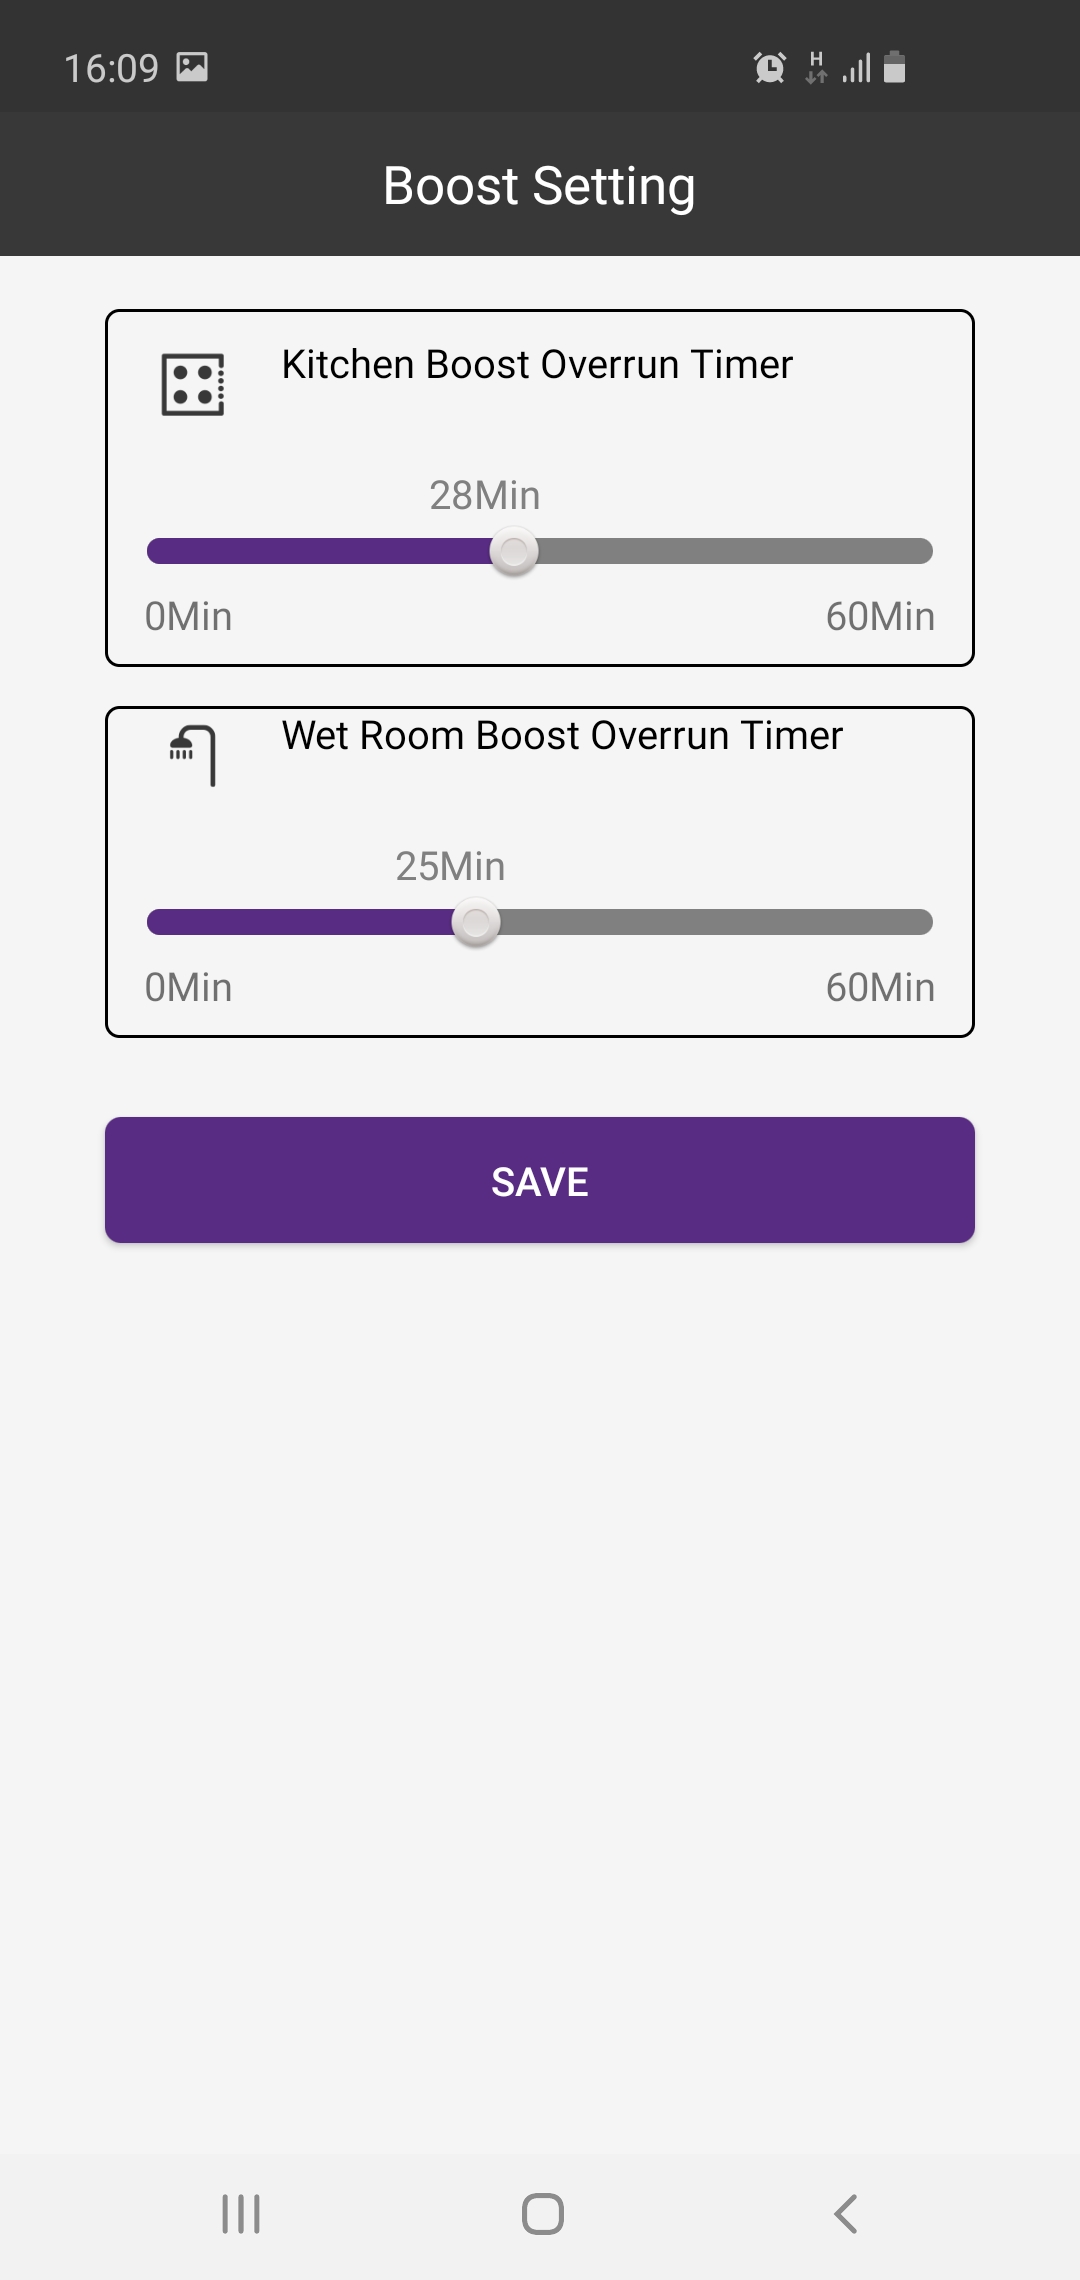 Beam VentSMART app boost setting page